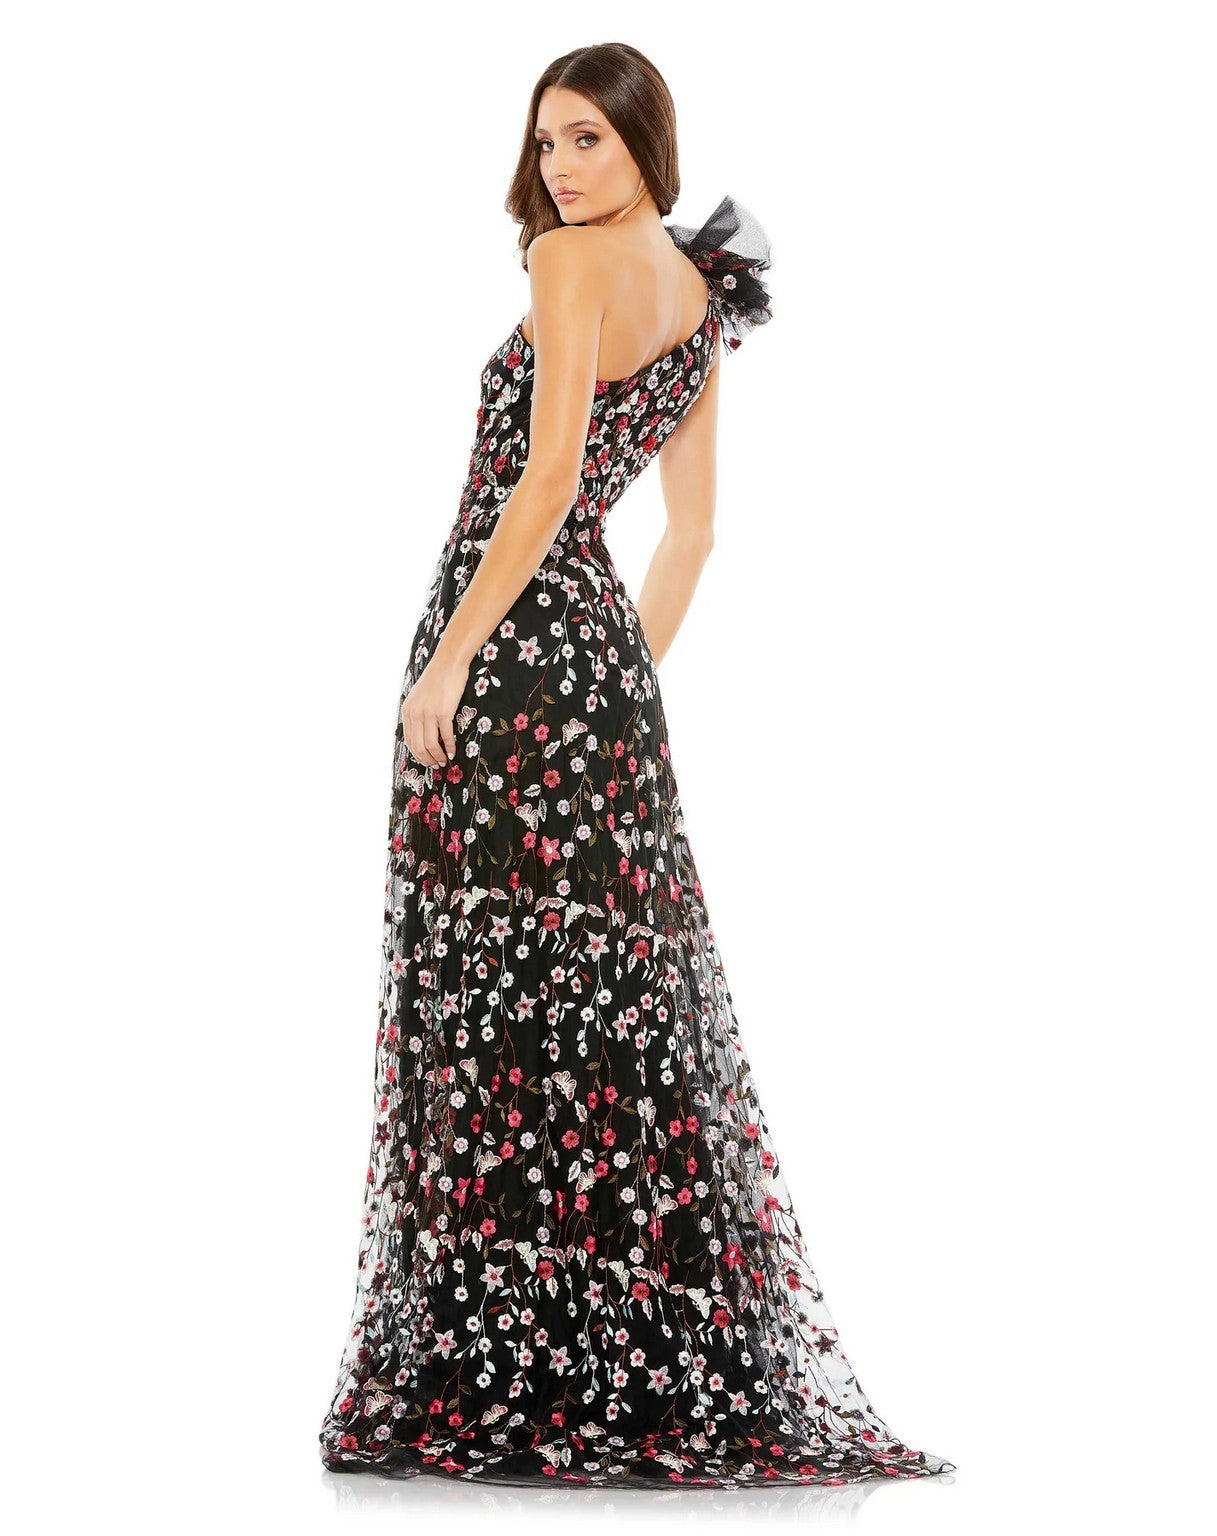 A woman in a Mac Duggal 20331 Long One Shoulder Floral Dress with red and white flowers.